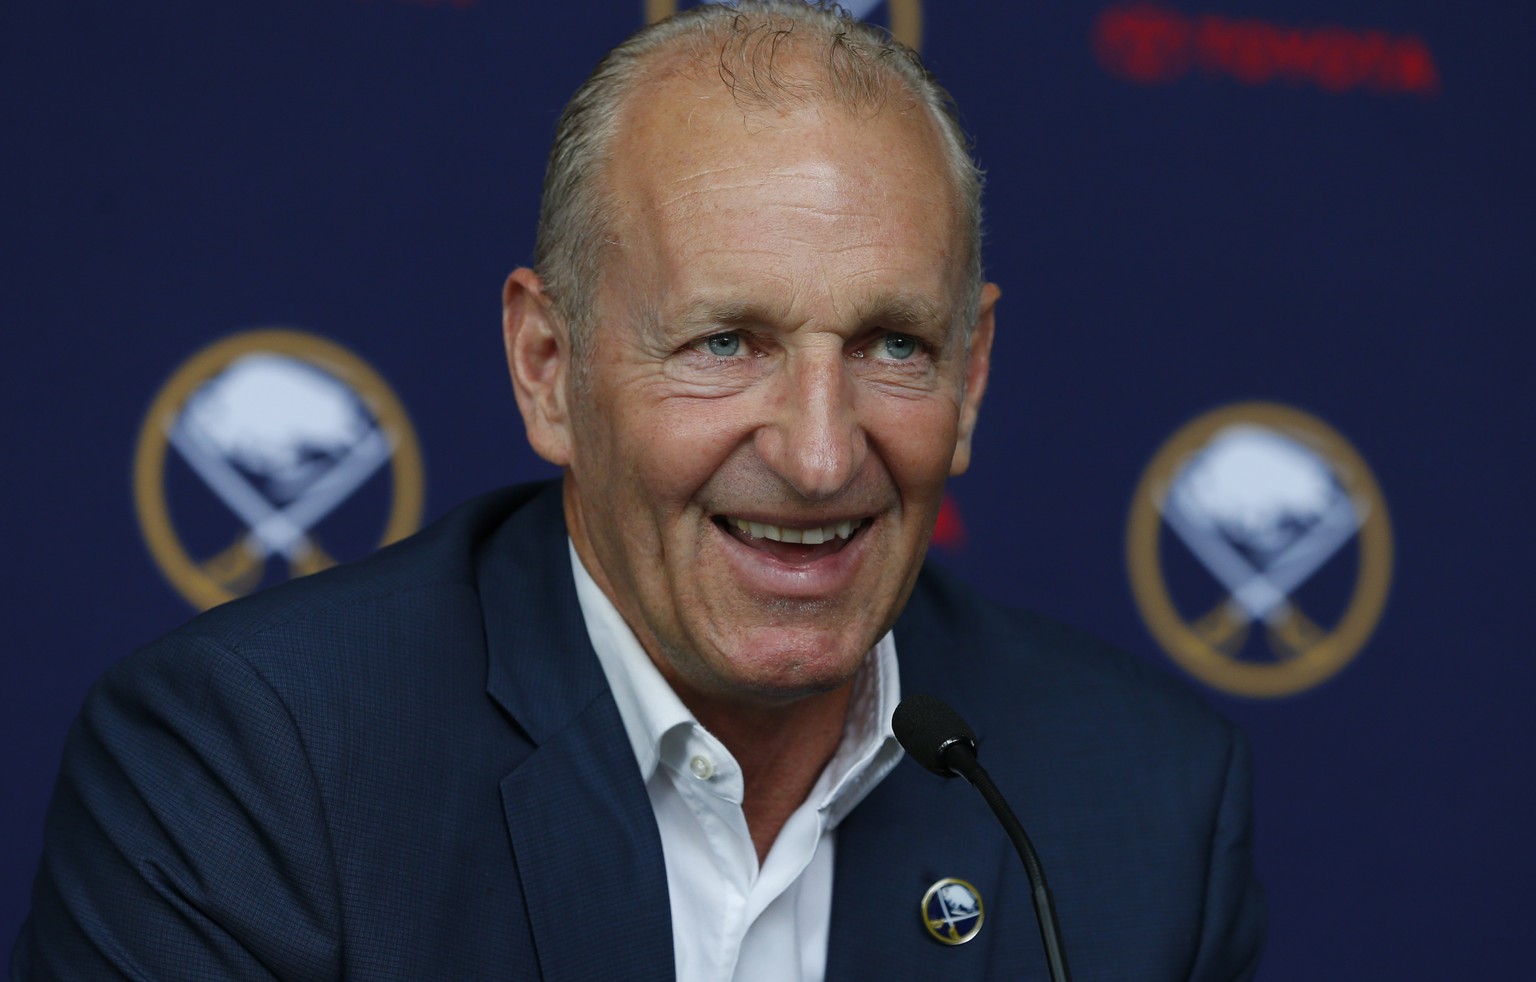 Buffalo Sabres head coach Ralph Krueger addresses the media during an NHL hockey introductory press conference Wednesday, June 5, 2019, in Buffalo N.Y. (AP Photo/Jeffrey T. Barnes)